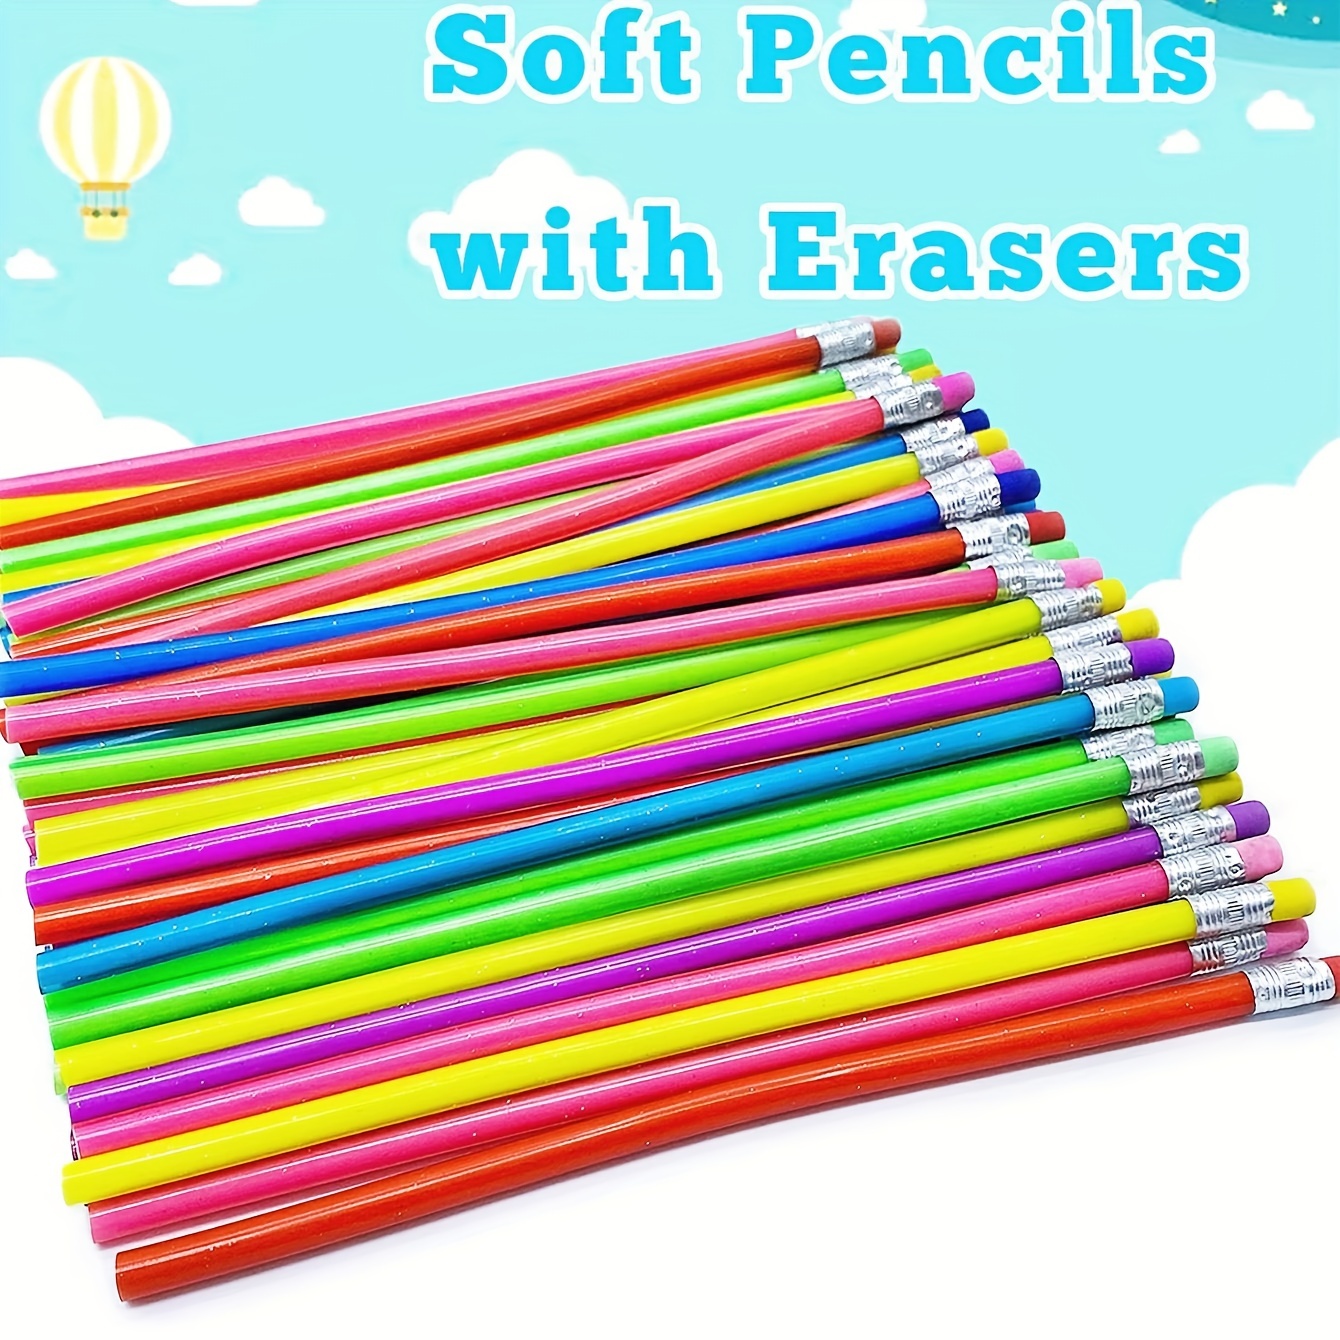 Flexible Soft Pencil, Magic Bendable Pencils, Multi-Colored Fun Soft  Pencils With Erasers For Kids, Classroom Supplies, Back To School Gifts,  Party